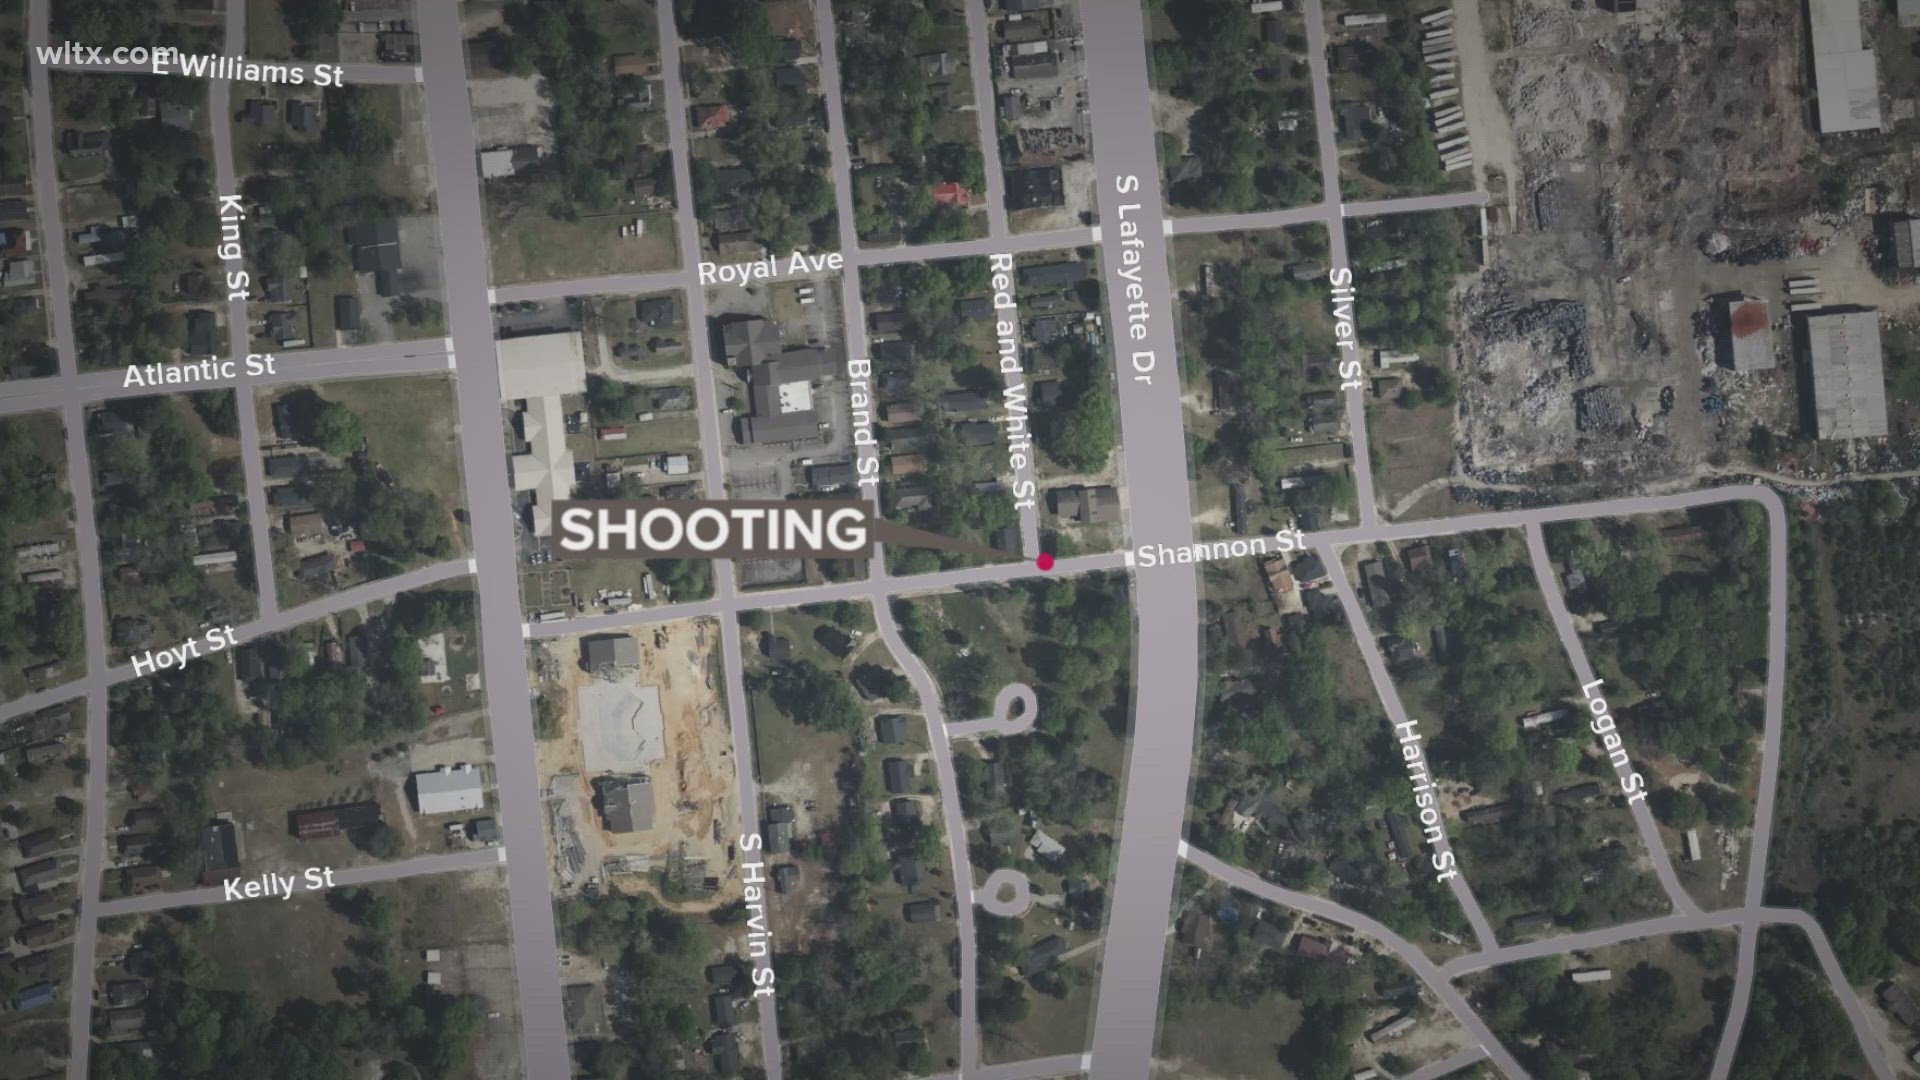 The shooting happened around 12:30 this afternoon at the corner of Shannon and Red and White street.